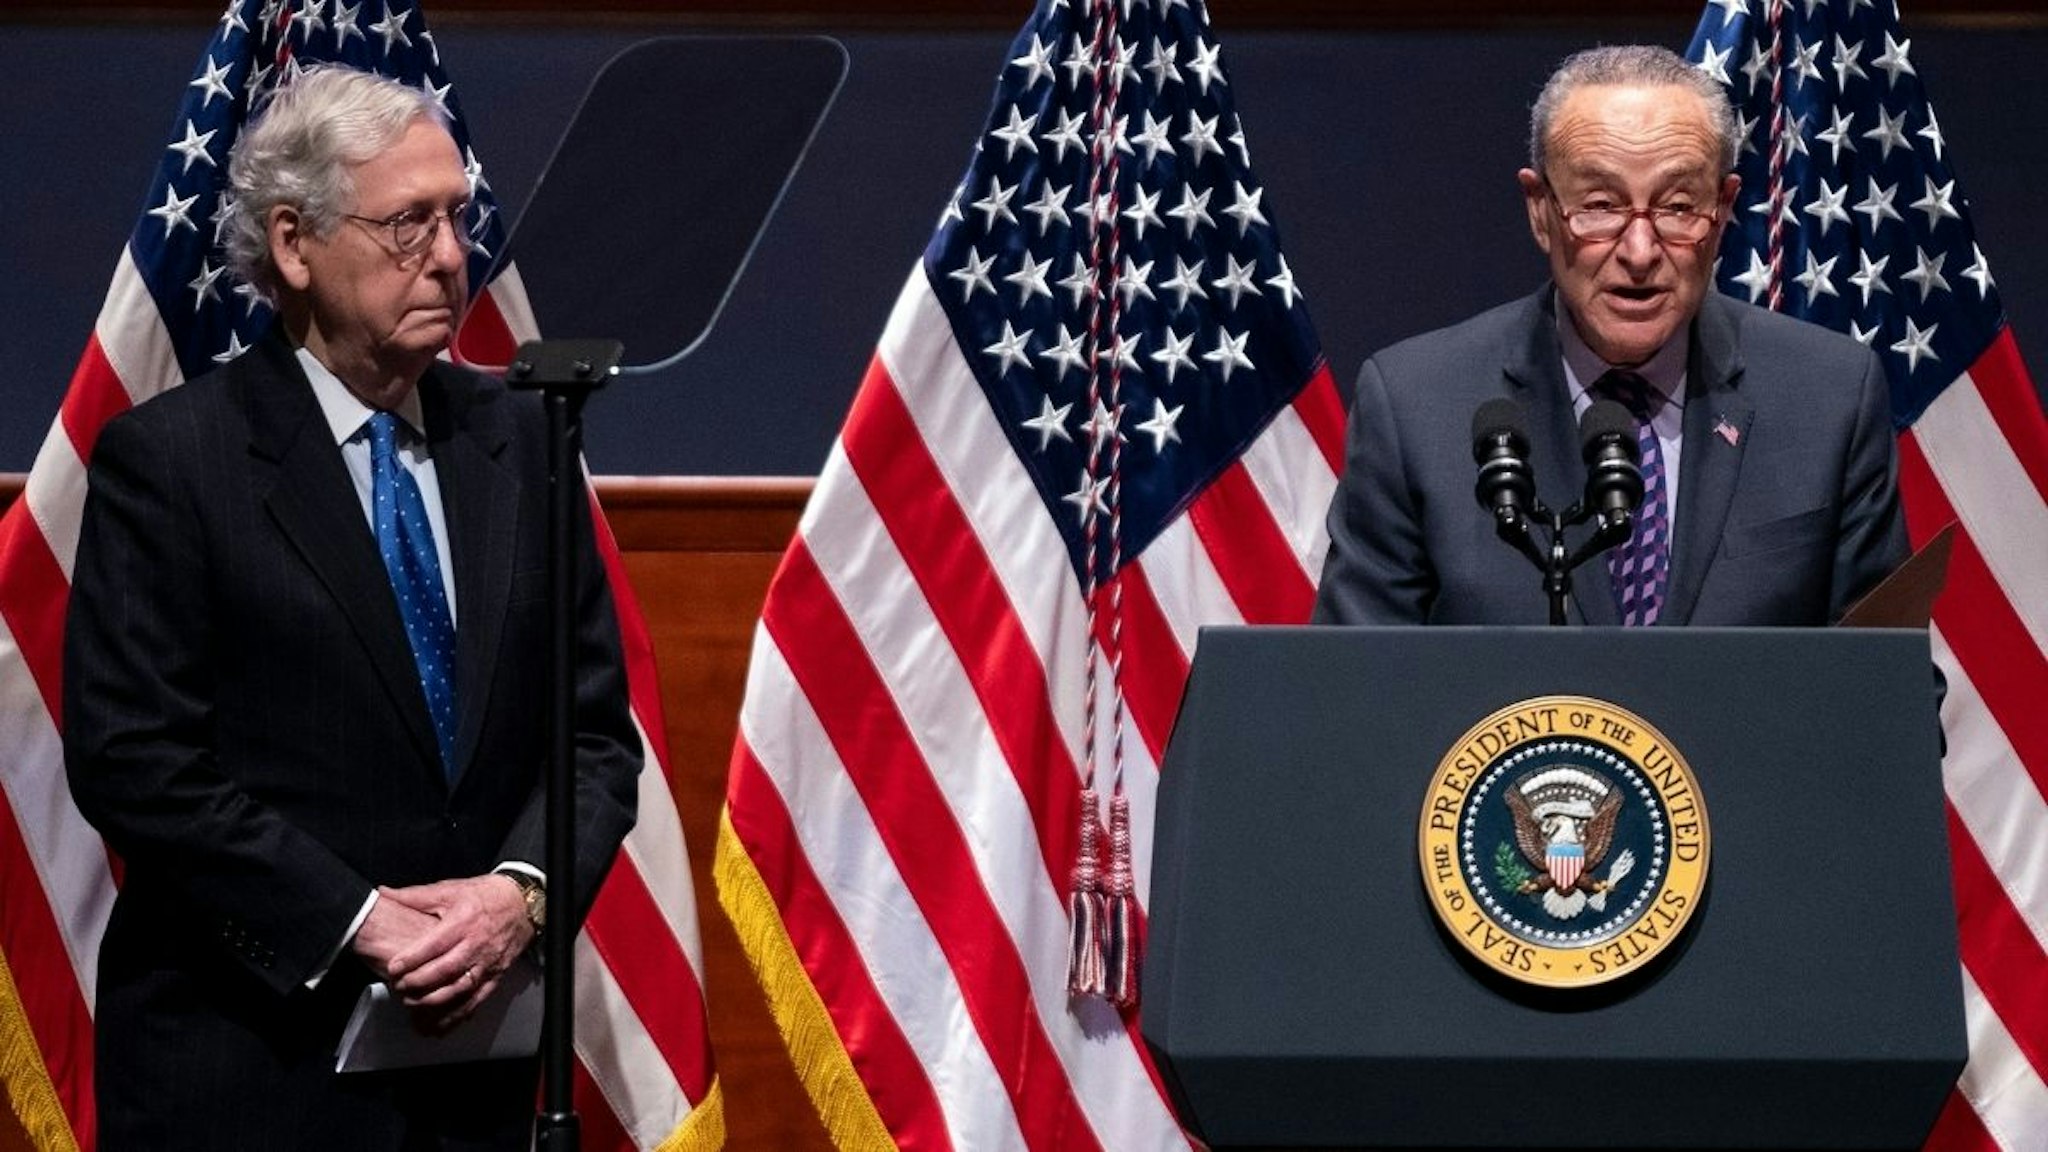 Minority Leader Mitch McConnell (R-Ky.) and Majority Leader Charles Schumer (D-N.Y.) address at the National Prayer Breakfast at the U.S. Capitol on February 3, 2022 in Washington, DC.